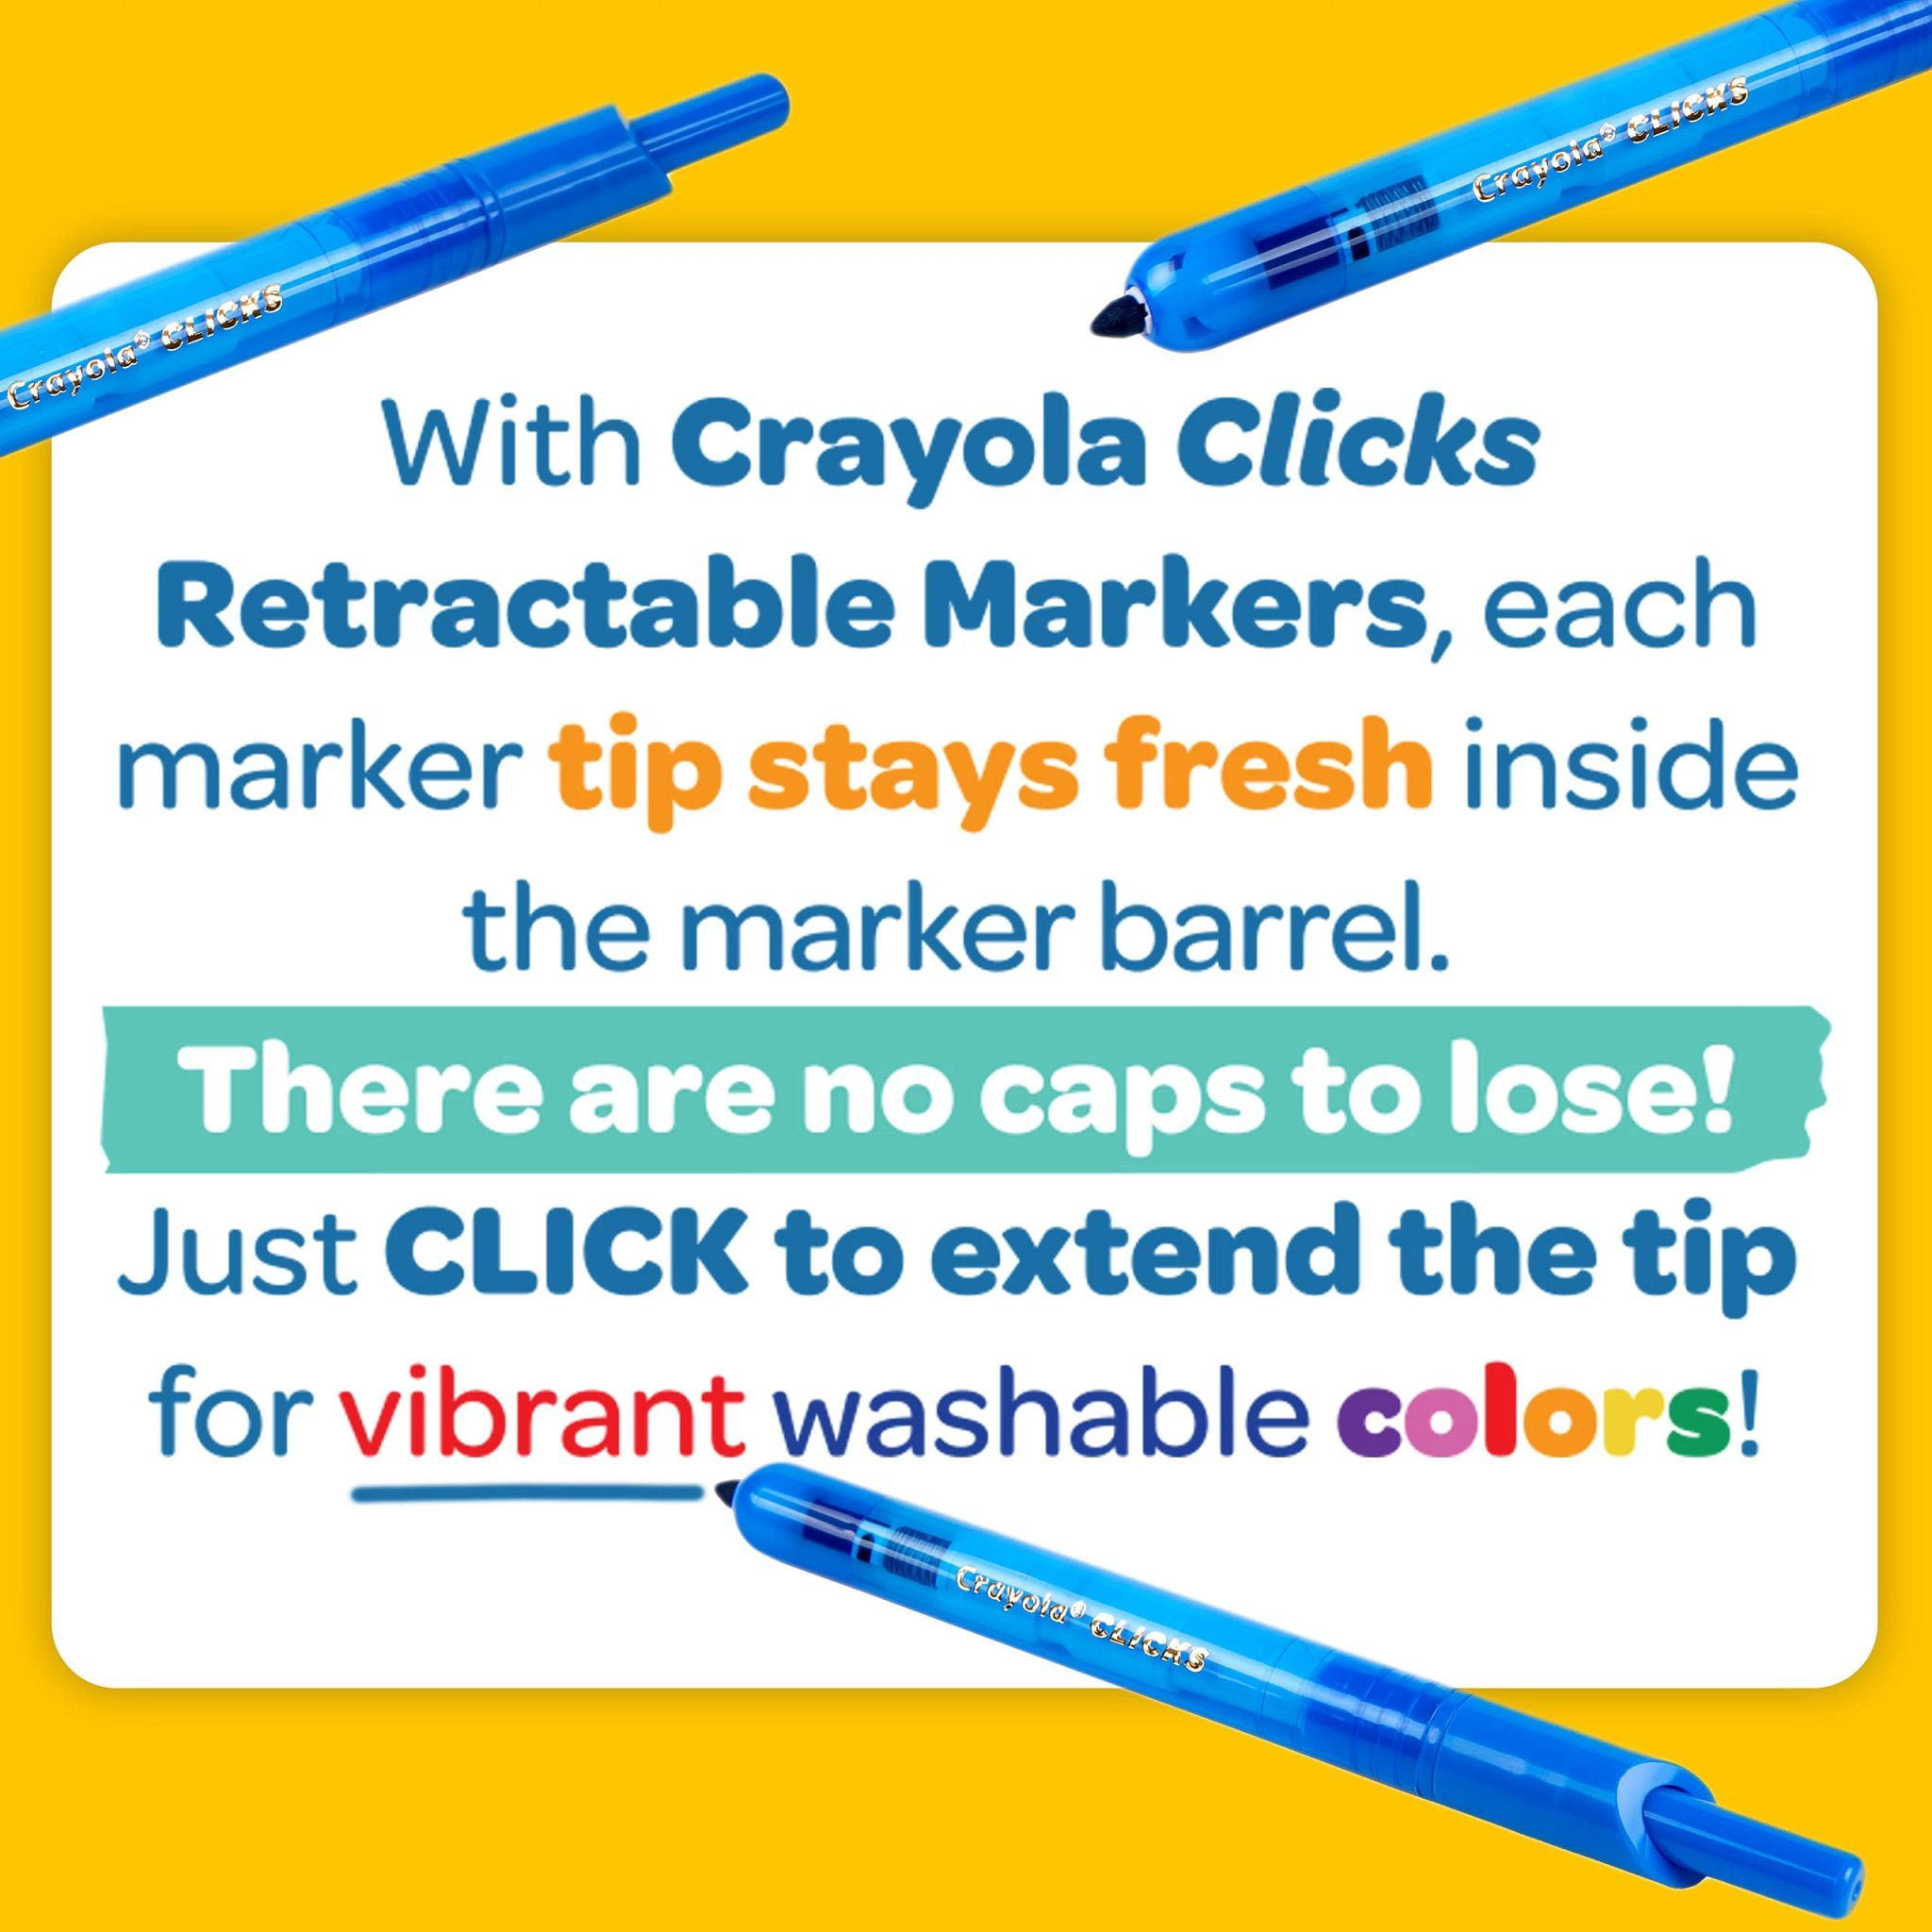 8 Packs: 10 ct. (80 total) Crayola® Clicks Retractable Markers™